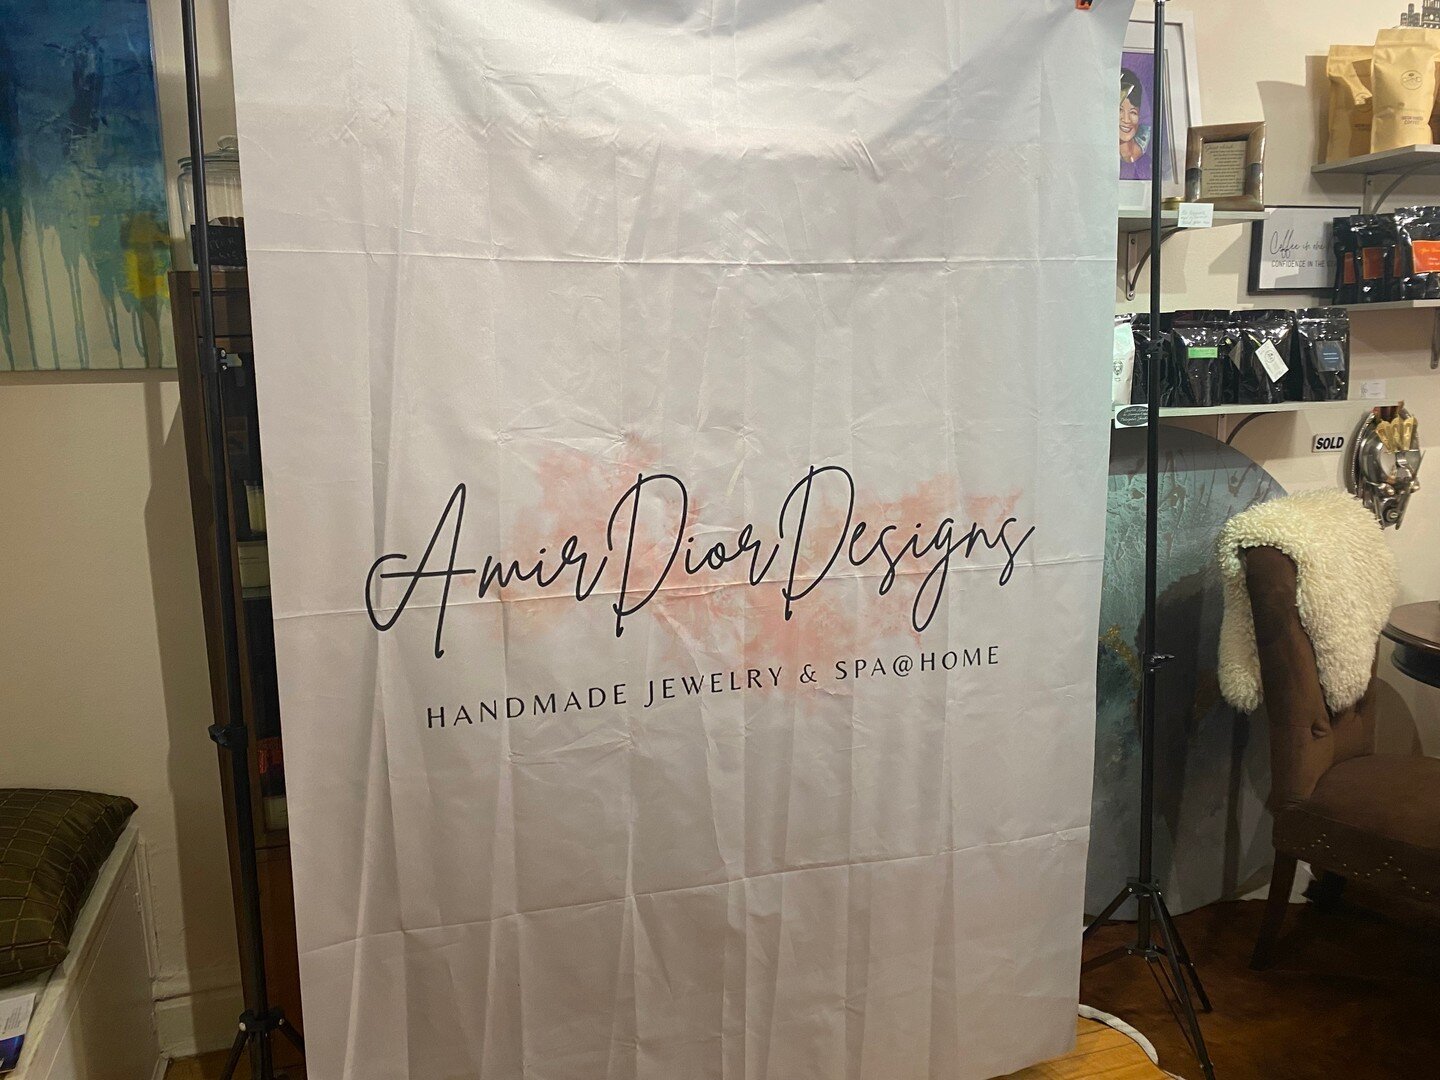 We would once again like to thank Amir Dior Designs for choosing GRND Coffee House to host their wonderful event.

Check out Amir Dior Designs at their website amirdiordesigns.com for great jewelry, just in time for the holiday season. Also be sure t